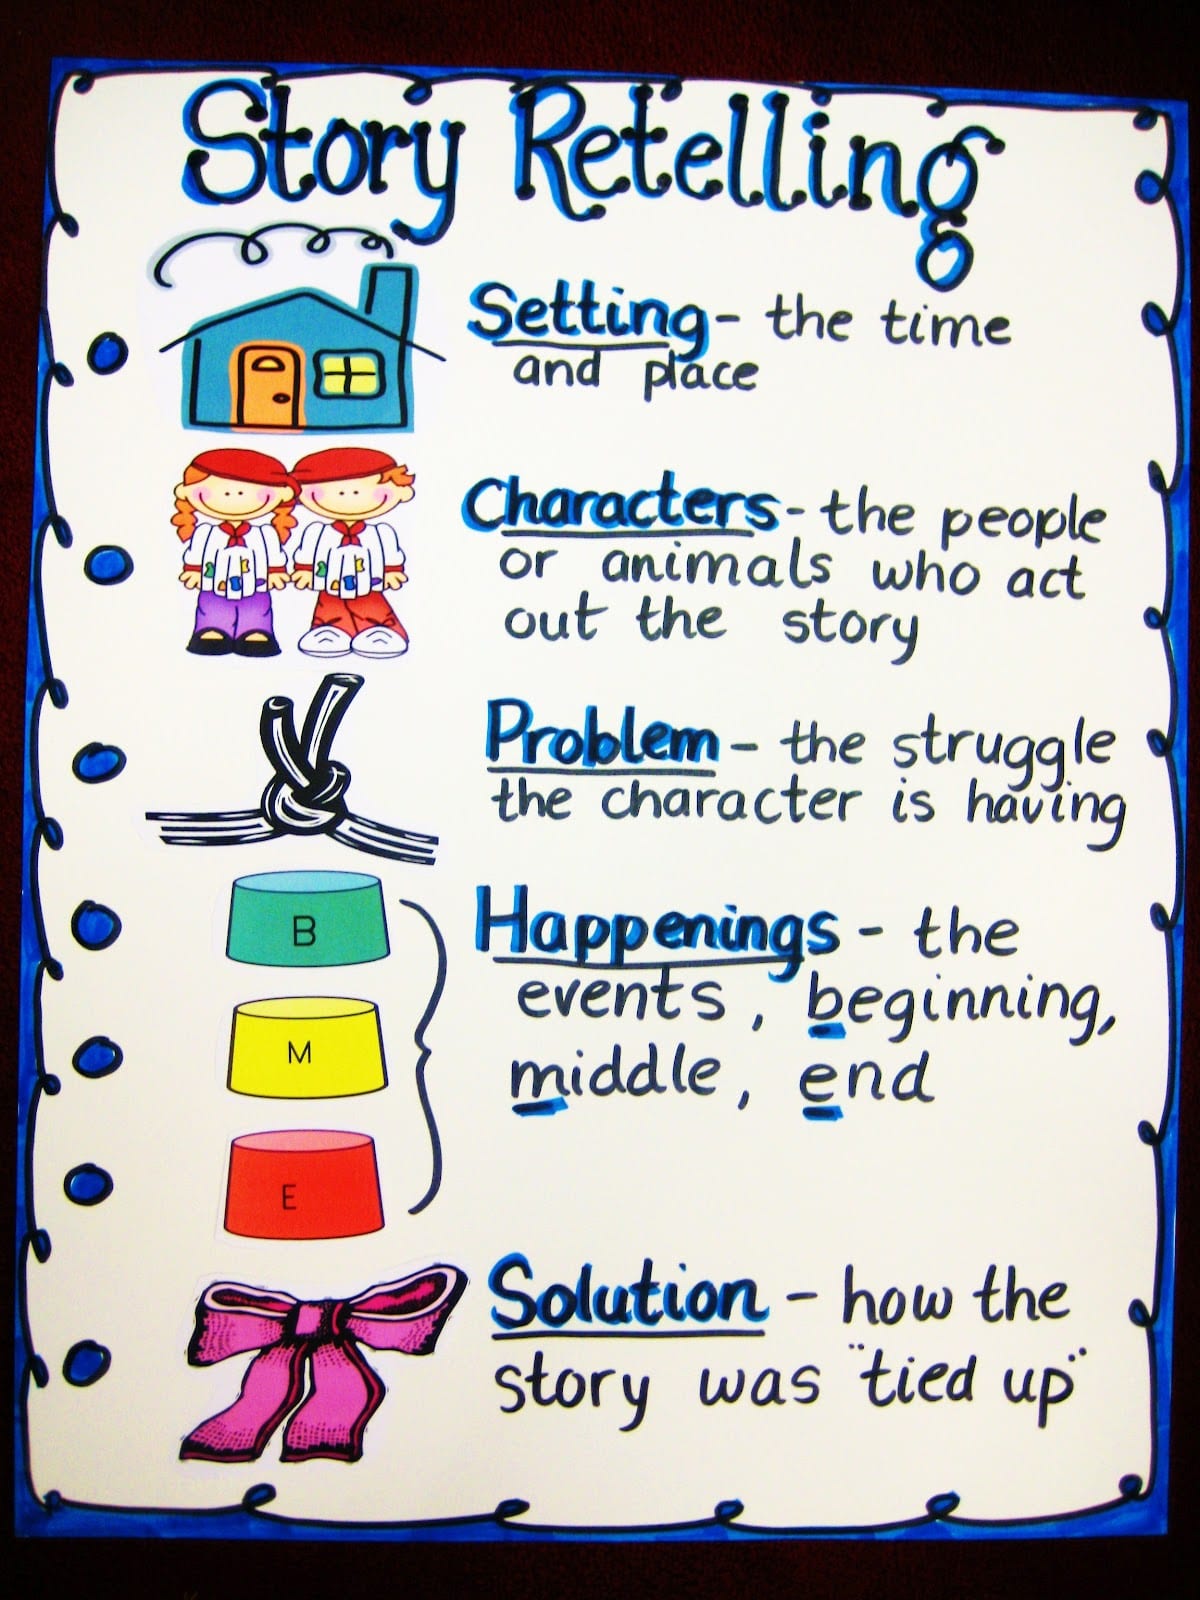 story elements anchor chart for middle school